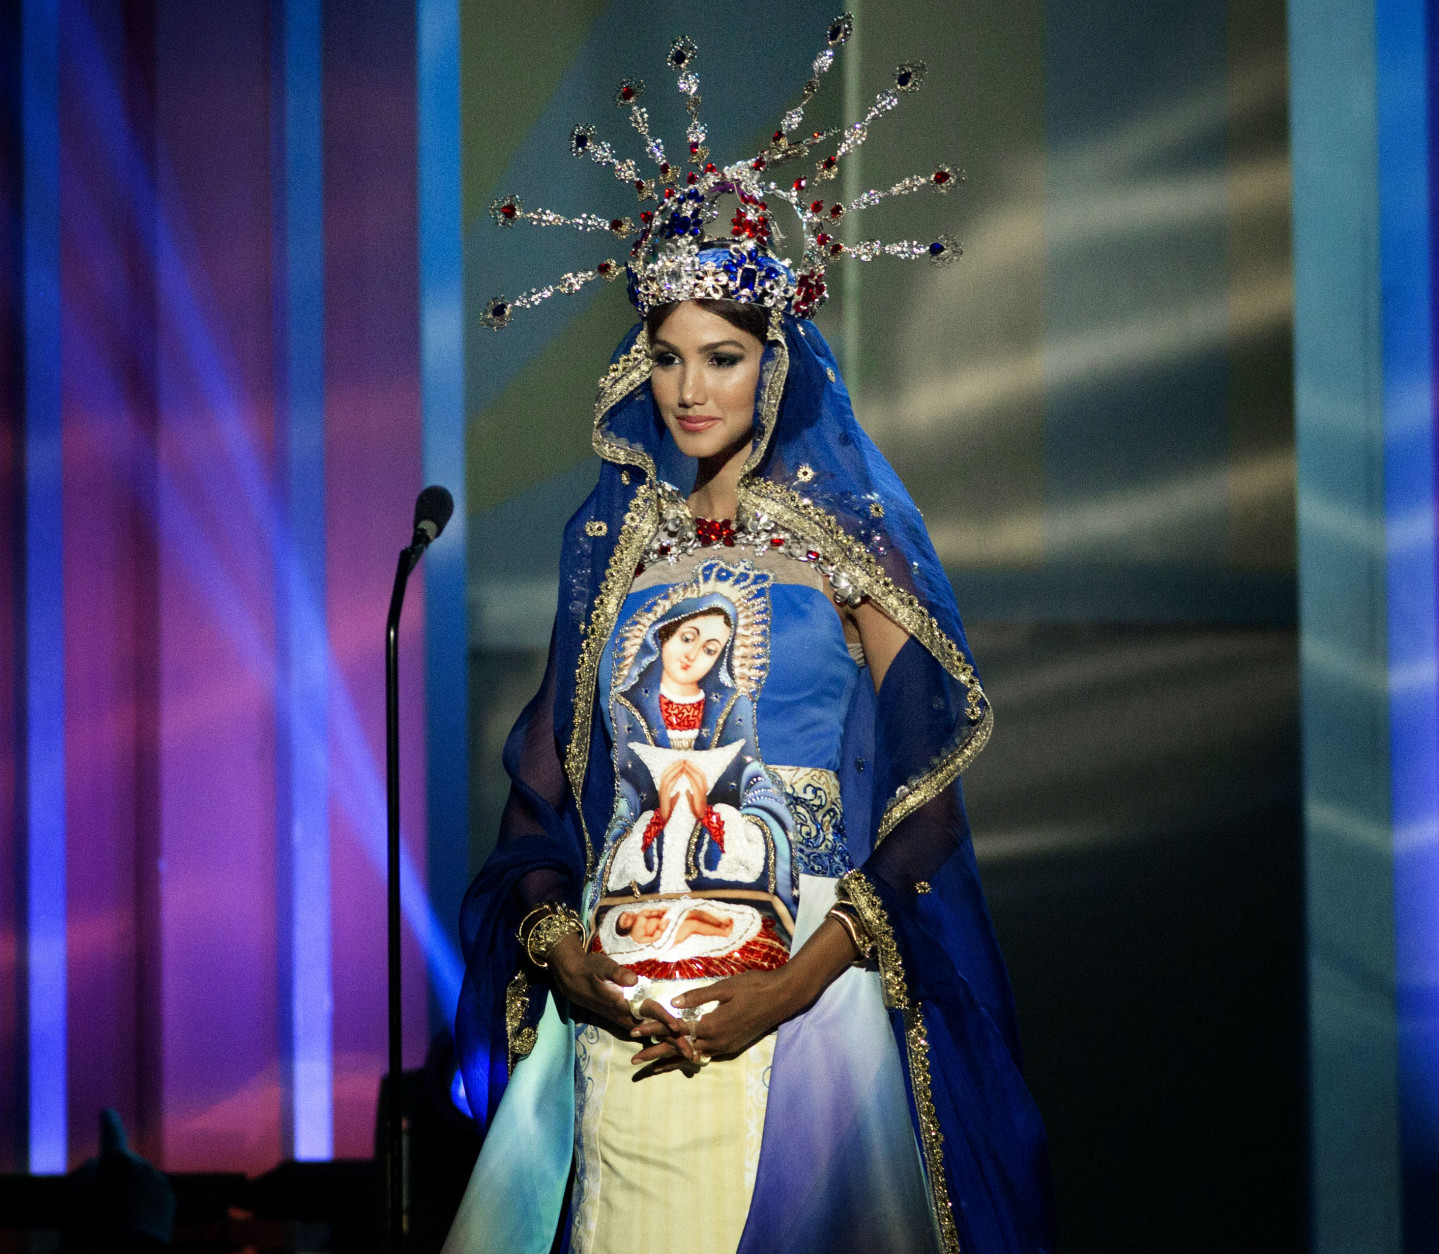 Miss Dominican Republic, Kimberly Castillo, poses for the judges, during the national costume show during the 63rd annual Miss Universe Competition in Miami, Fla., Wednesday, Jan. 21, 2015. (AP Photo/J Pat Carter)